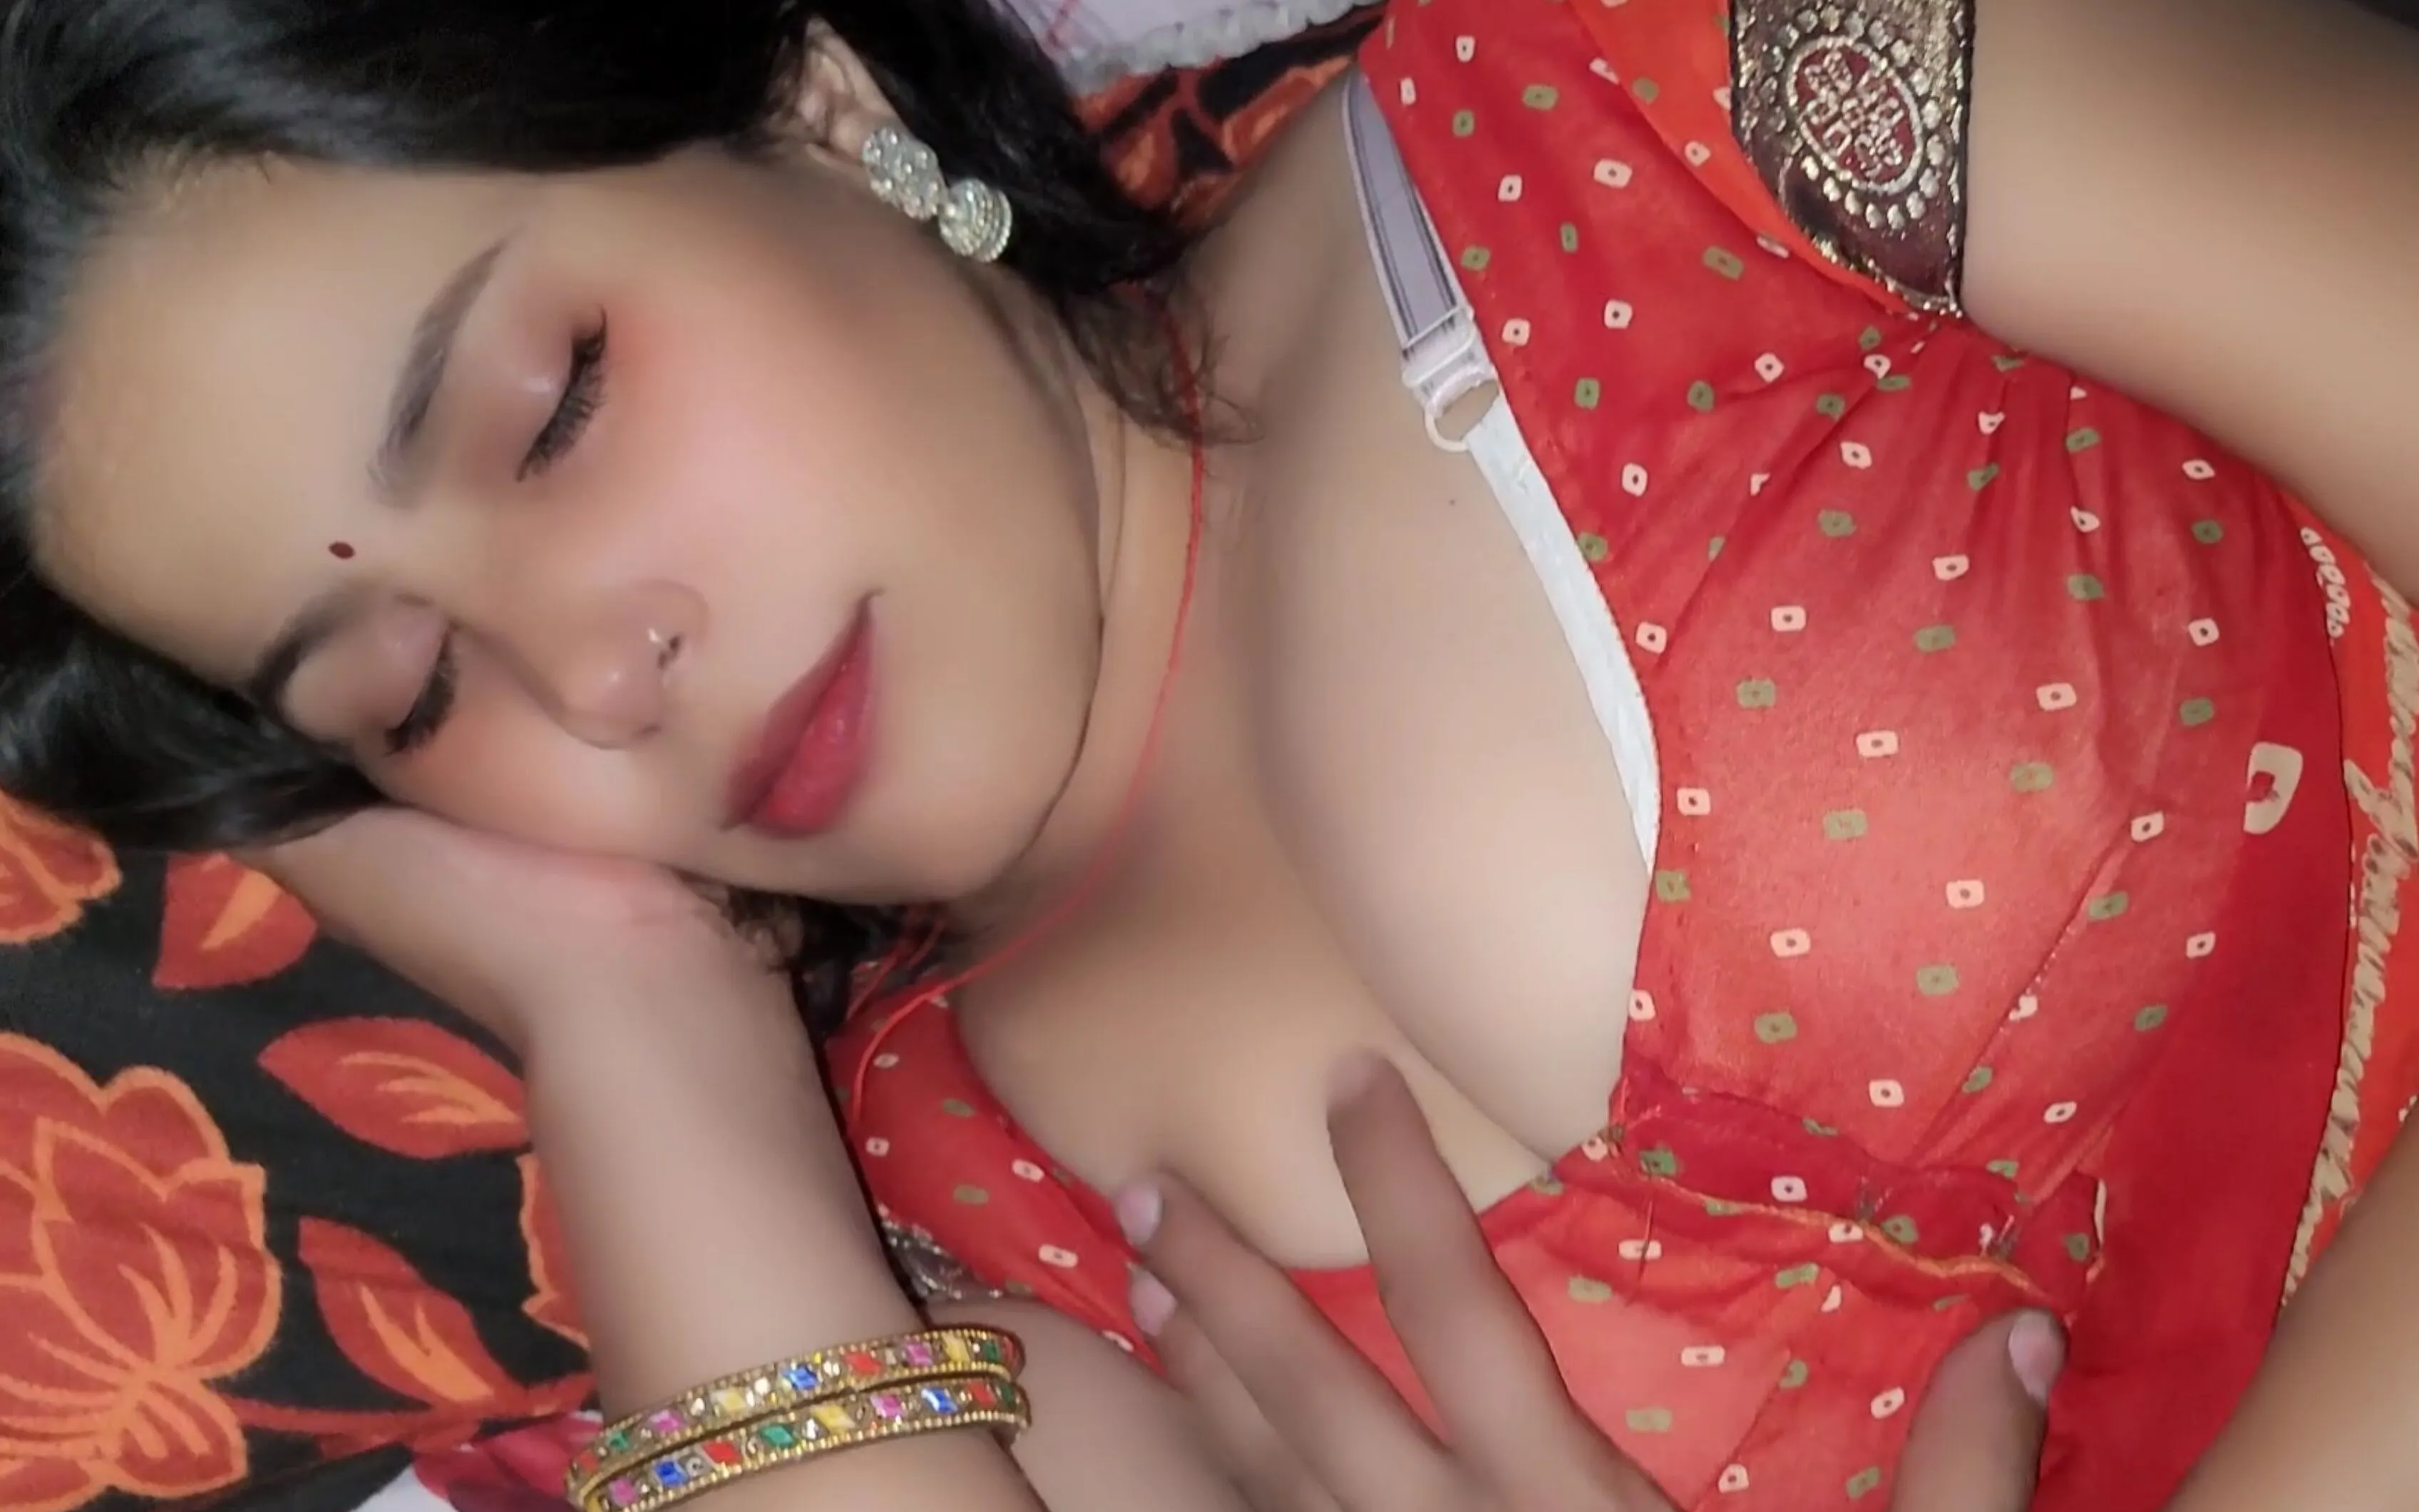 Sex Video Indian 10 Mb Take Ki - I am hot sexy girl by Gentleness | Faphouse